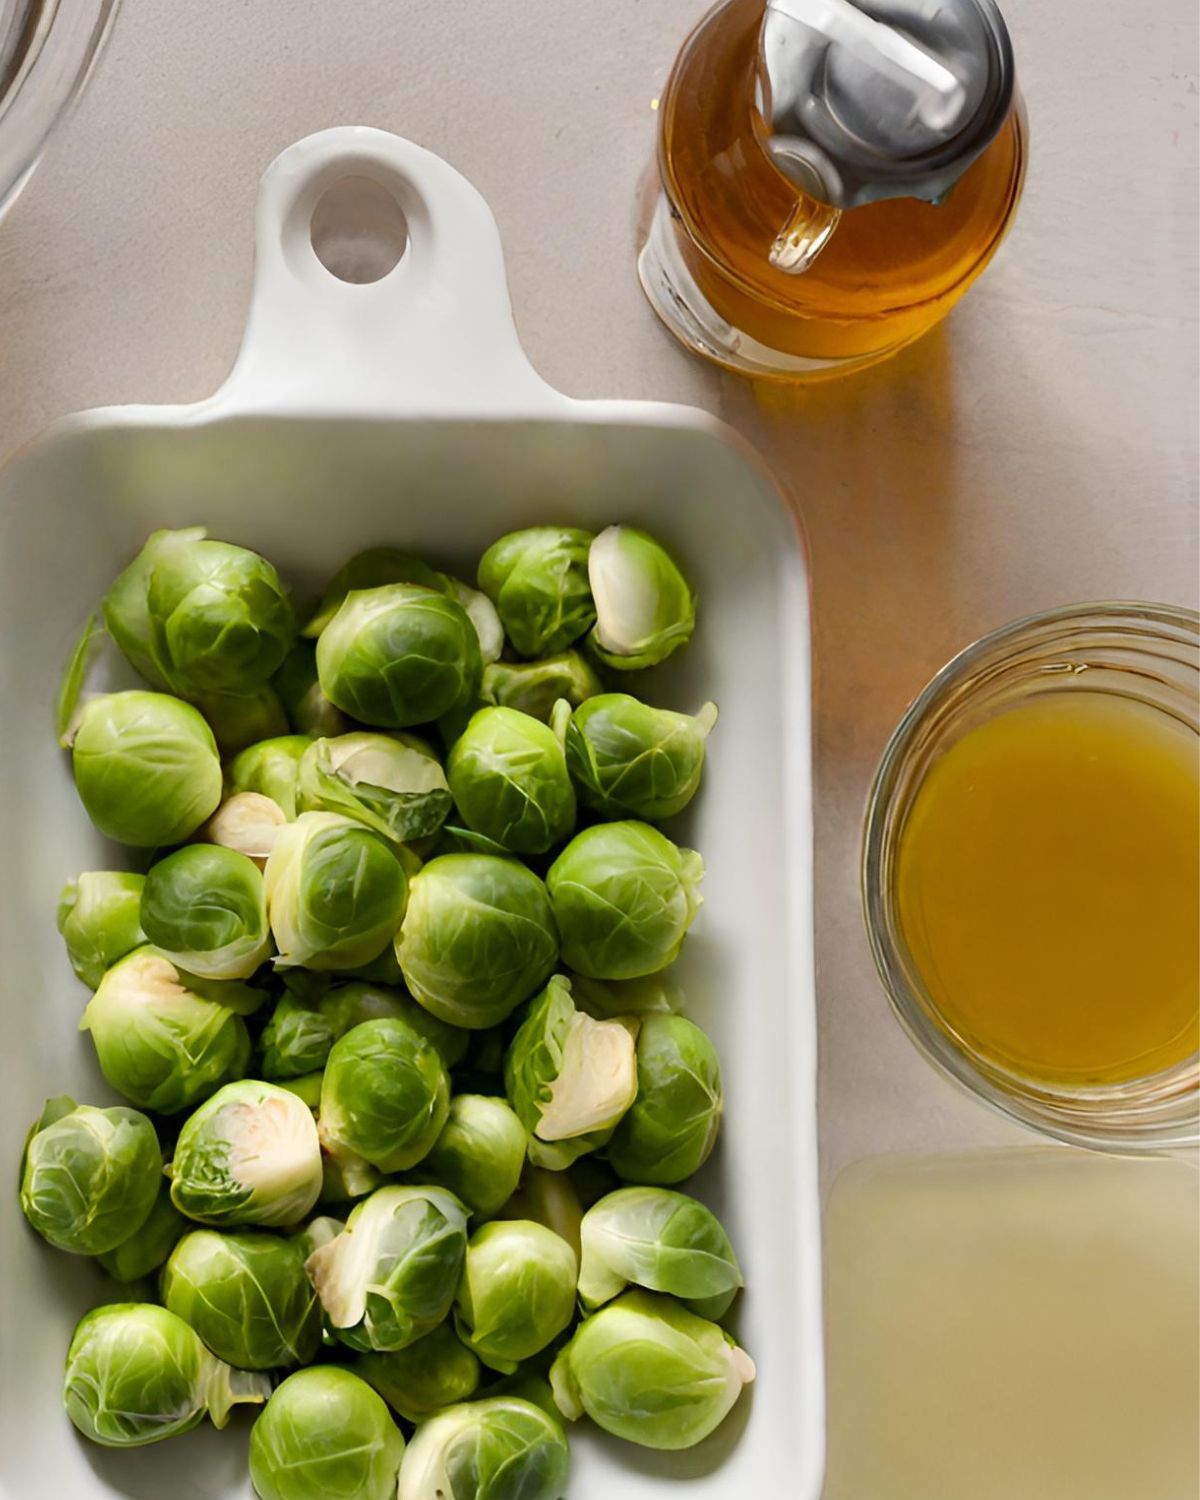 Brussel sprouts and maple syrup to make the dish.